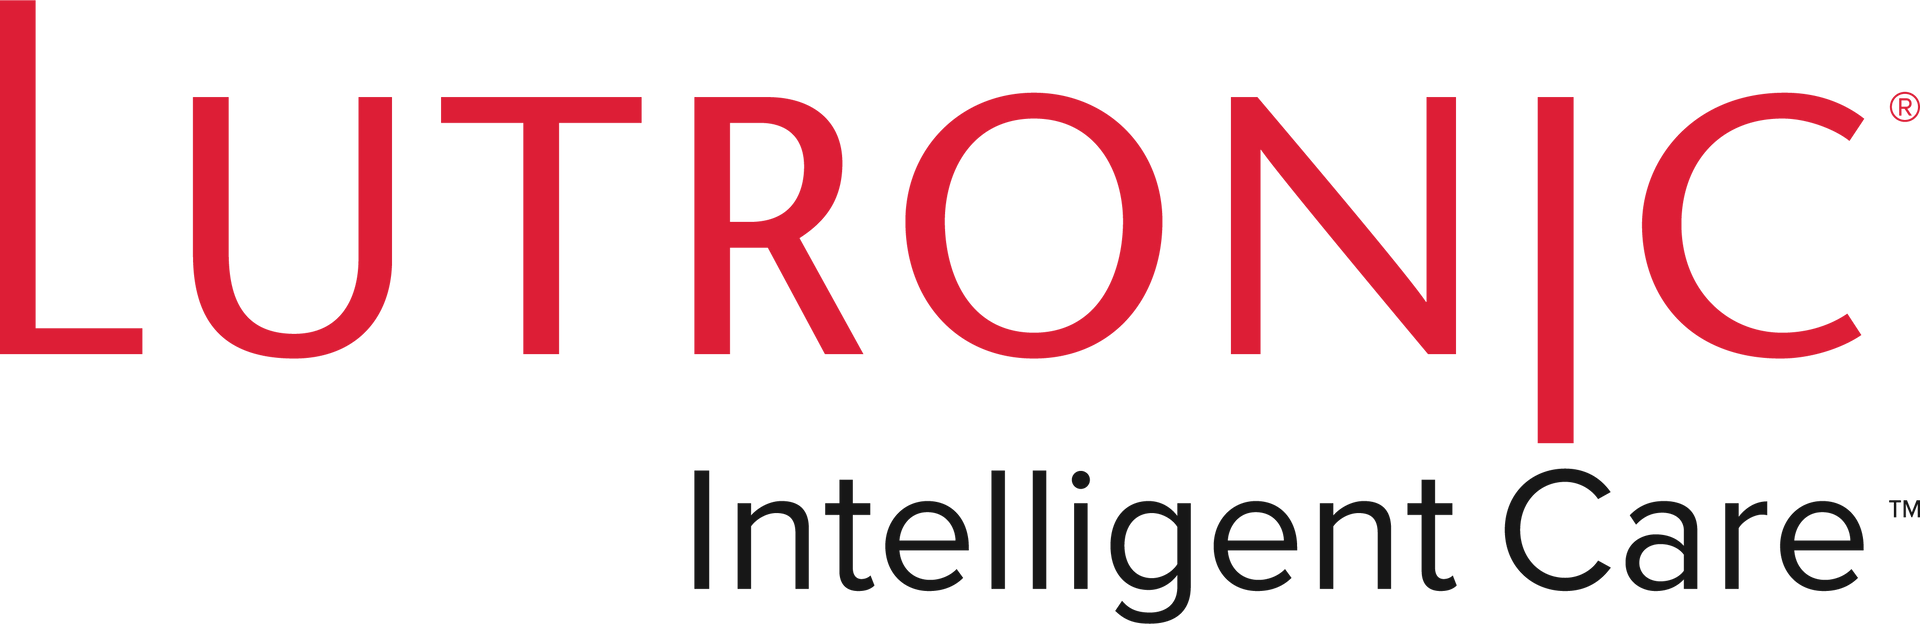 the logo for lutronic intelligent care is red and white .